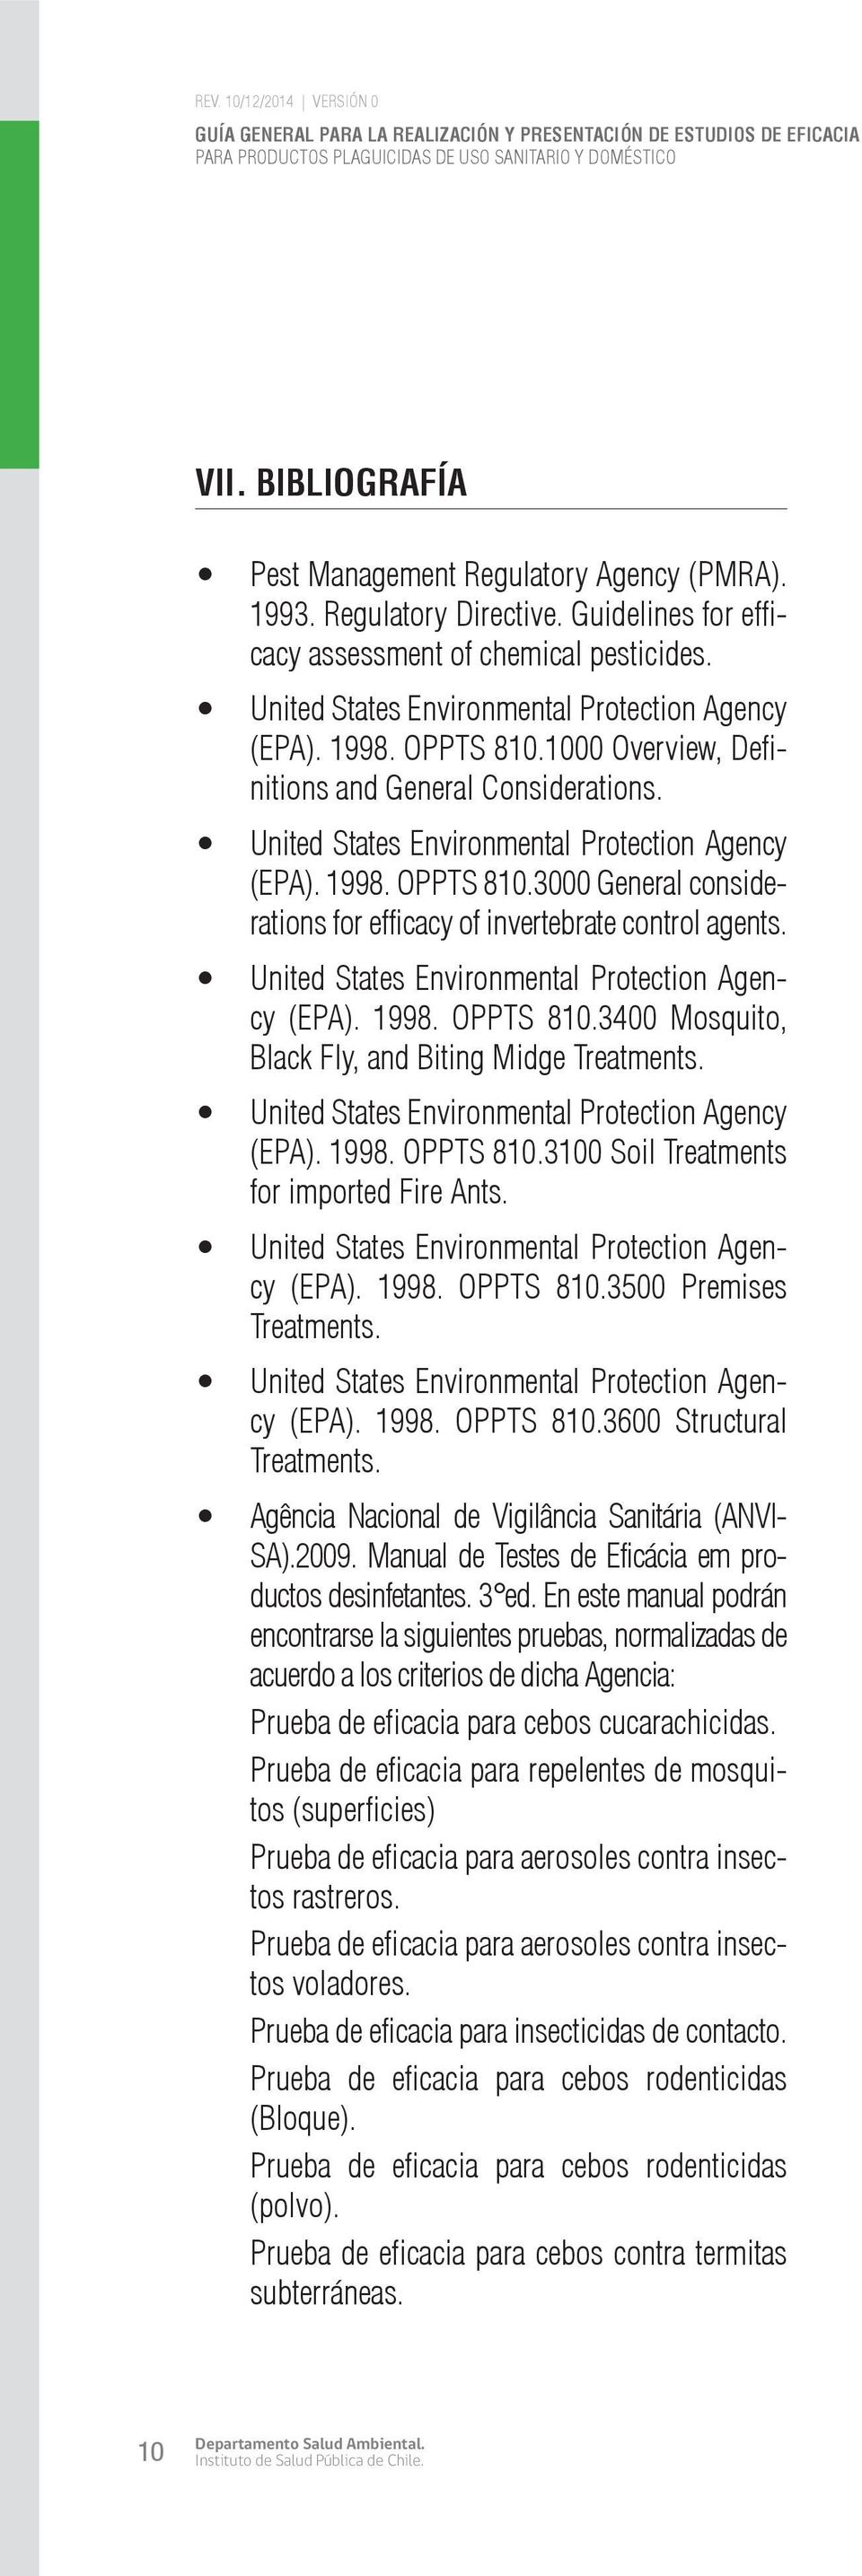 (EPA). 1998. OPPTS 810.3100 Soil Treatments for imported Fire Ants. (EPA). 1998. OPPTS 810.3500 Premises Treatments. (EPA). 1998. OPPTS 810.3600 Structural Treatments.